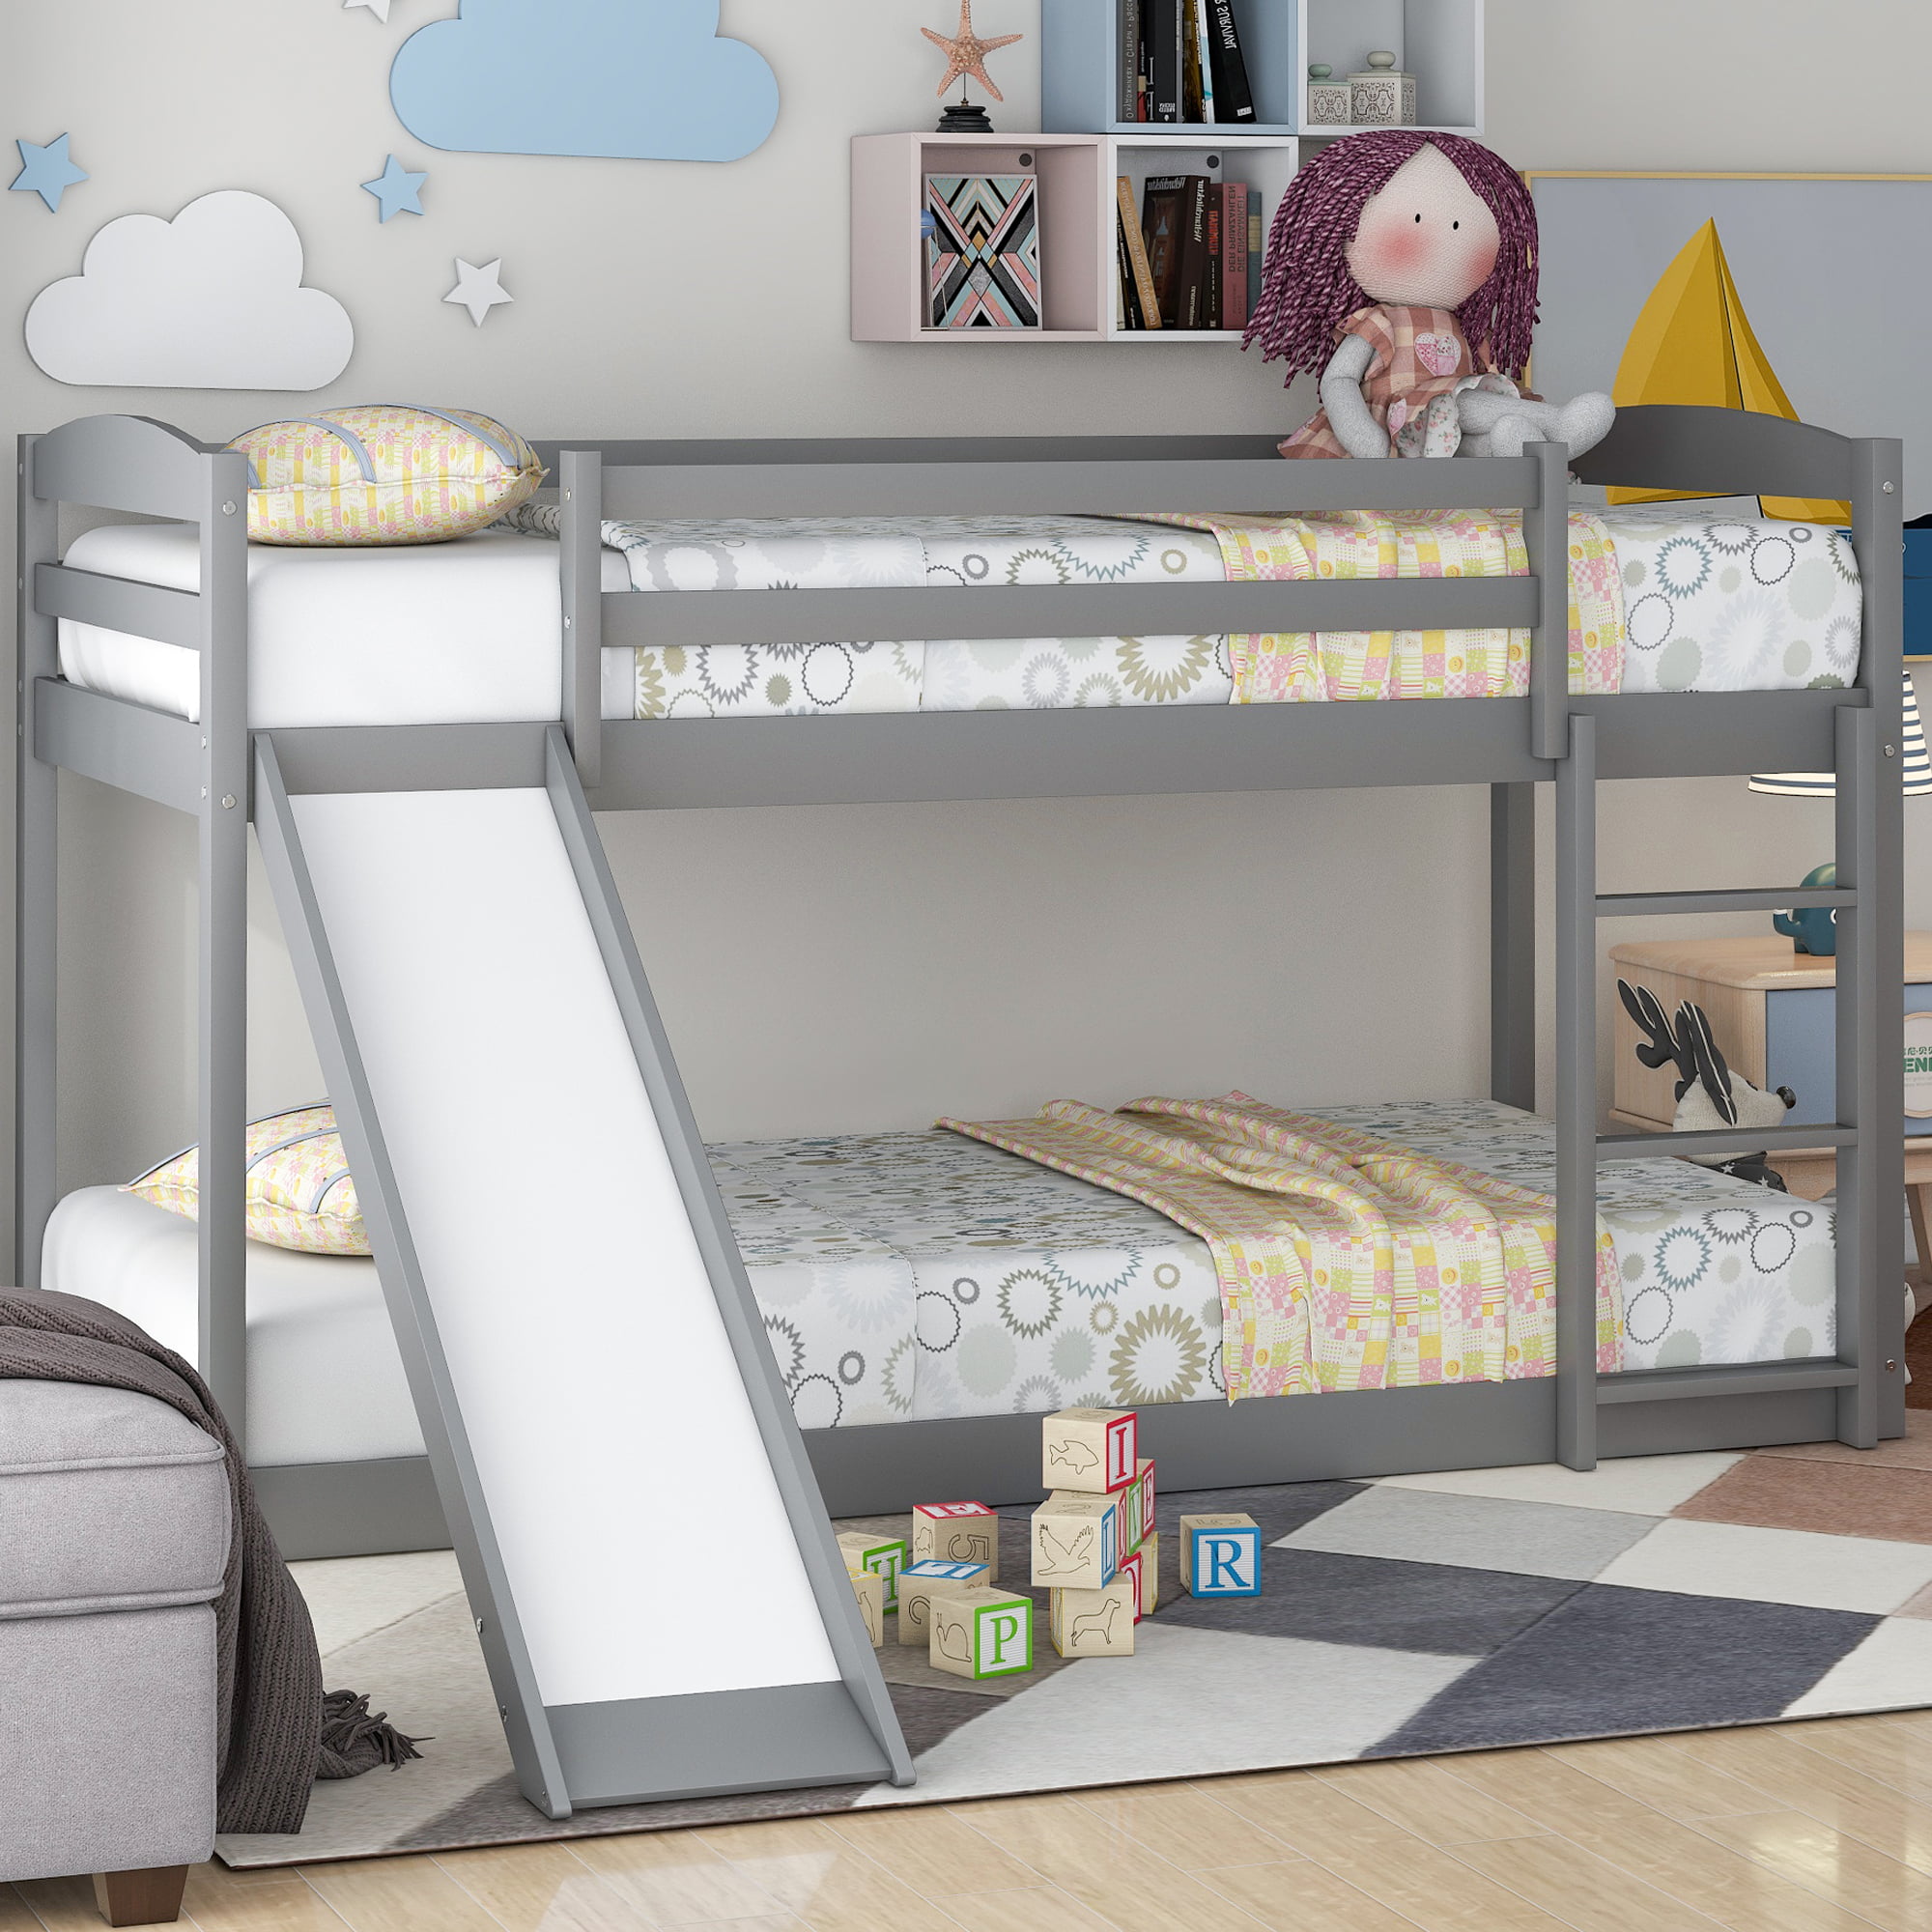 Bunk Bed With Slide Kids Beds, Mini Bunk Beds For Toddlers